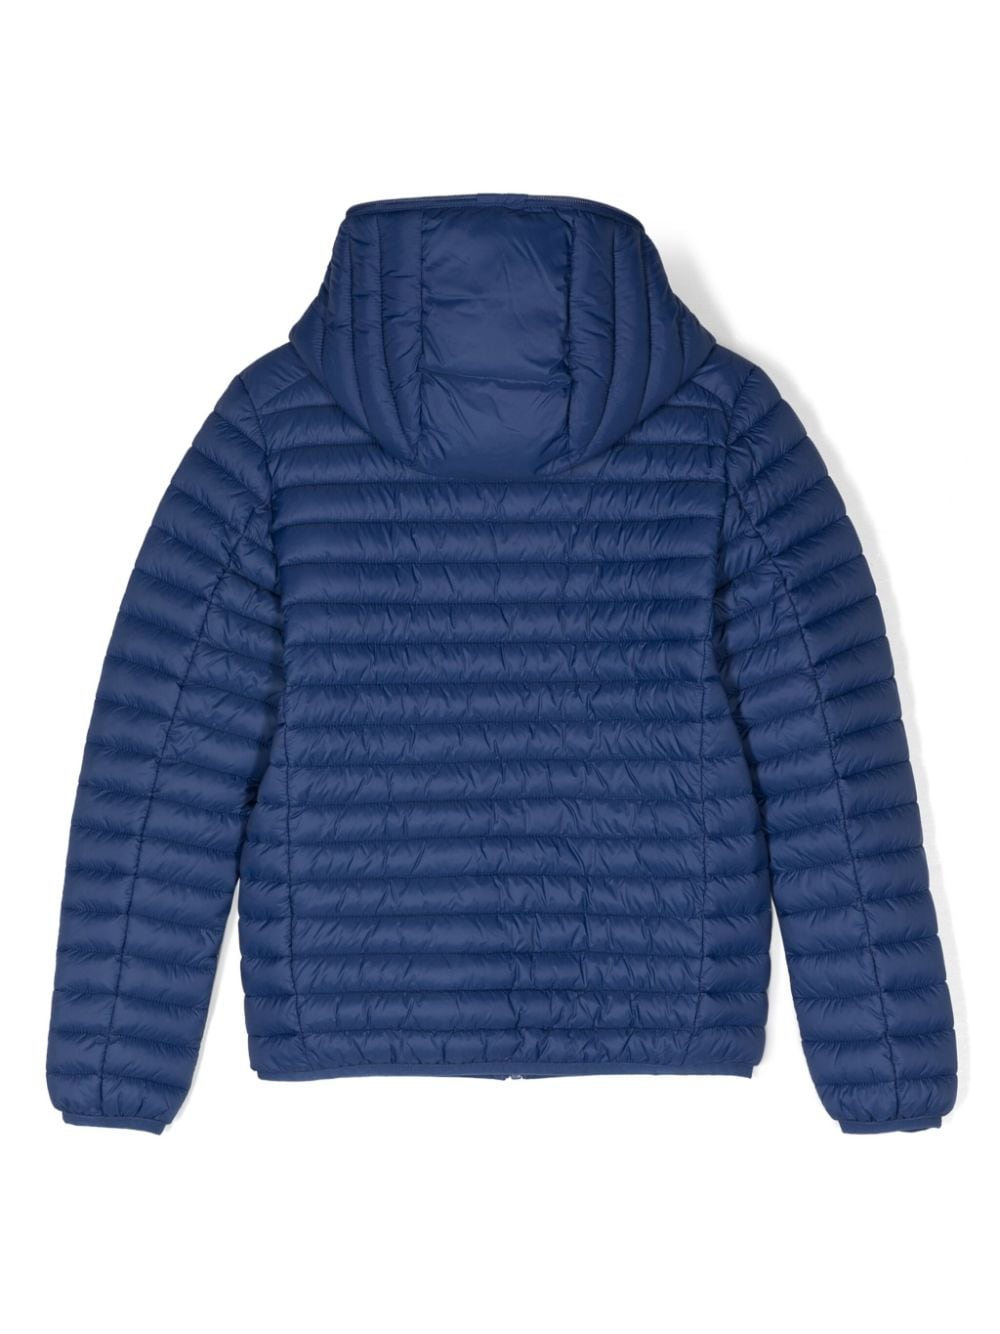 Navy blue jacket for boys with logo